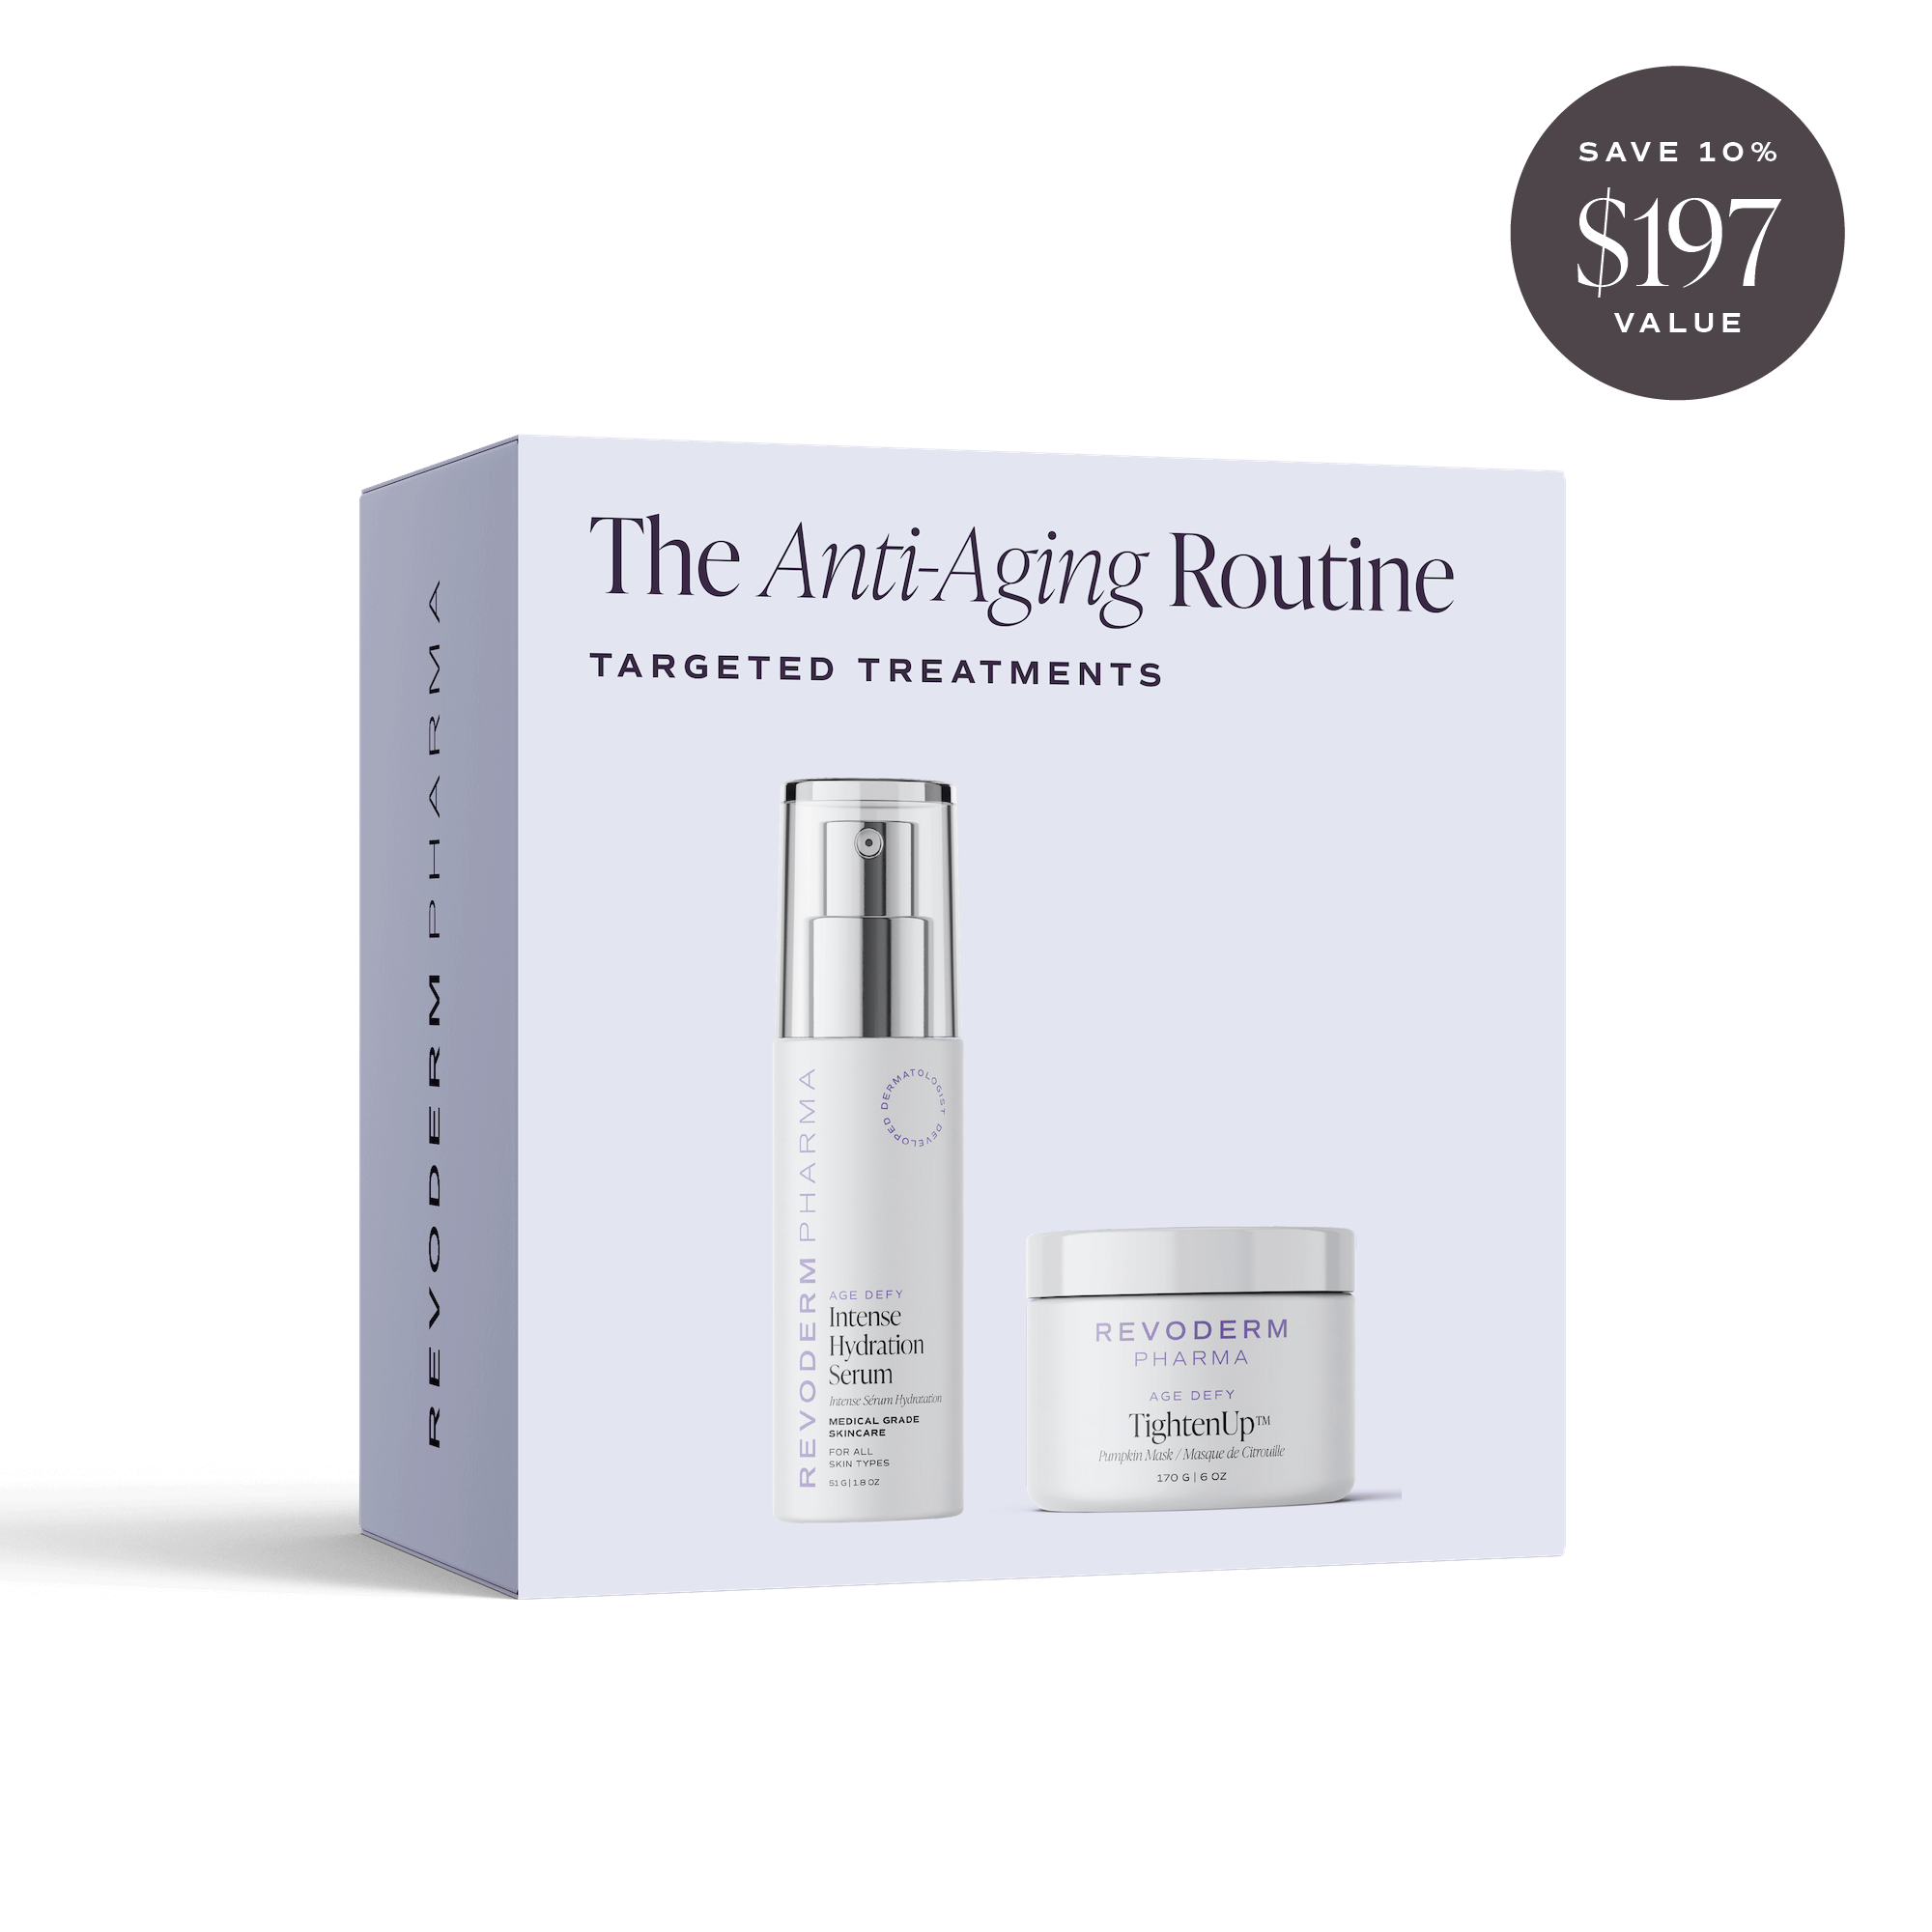 Targeted Treatment Duo: Anti-Aging